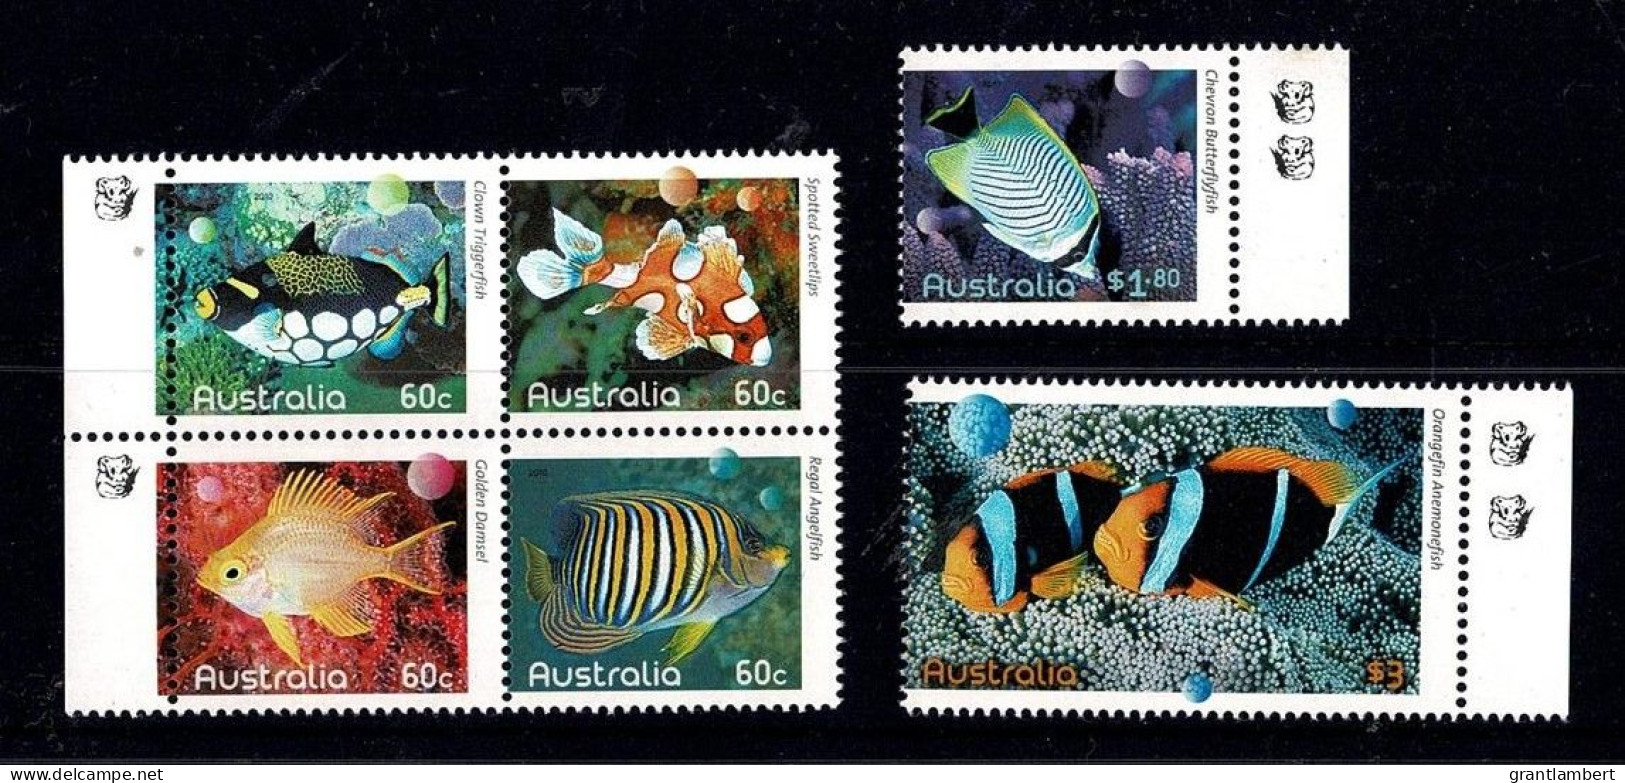 Australia 2010 Fishes Of The Reef - Koala Reprints MNH - Mint Stamps